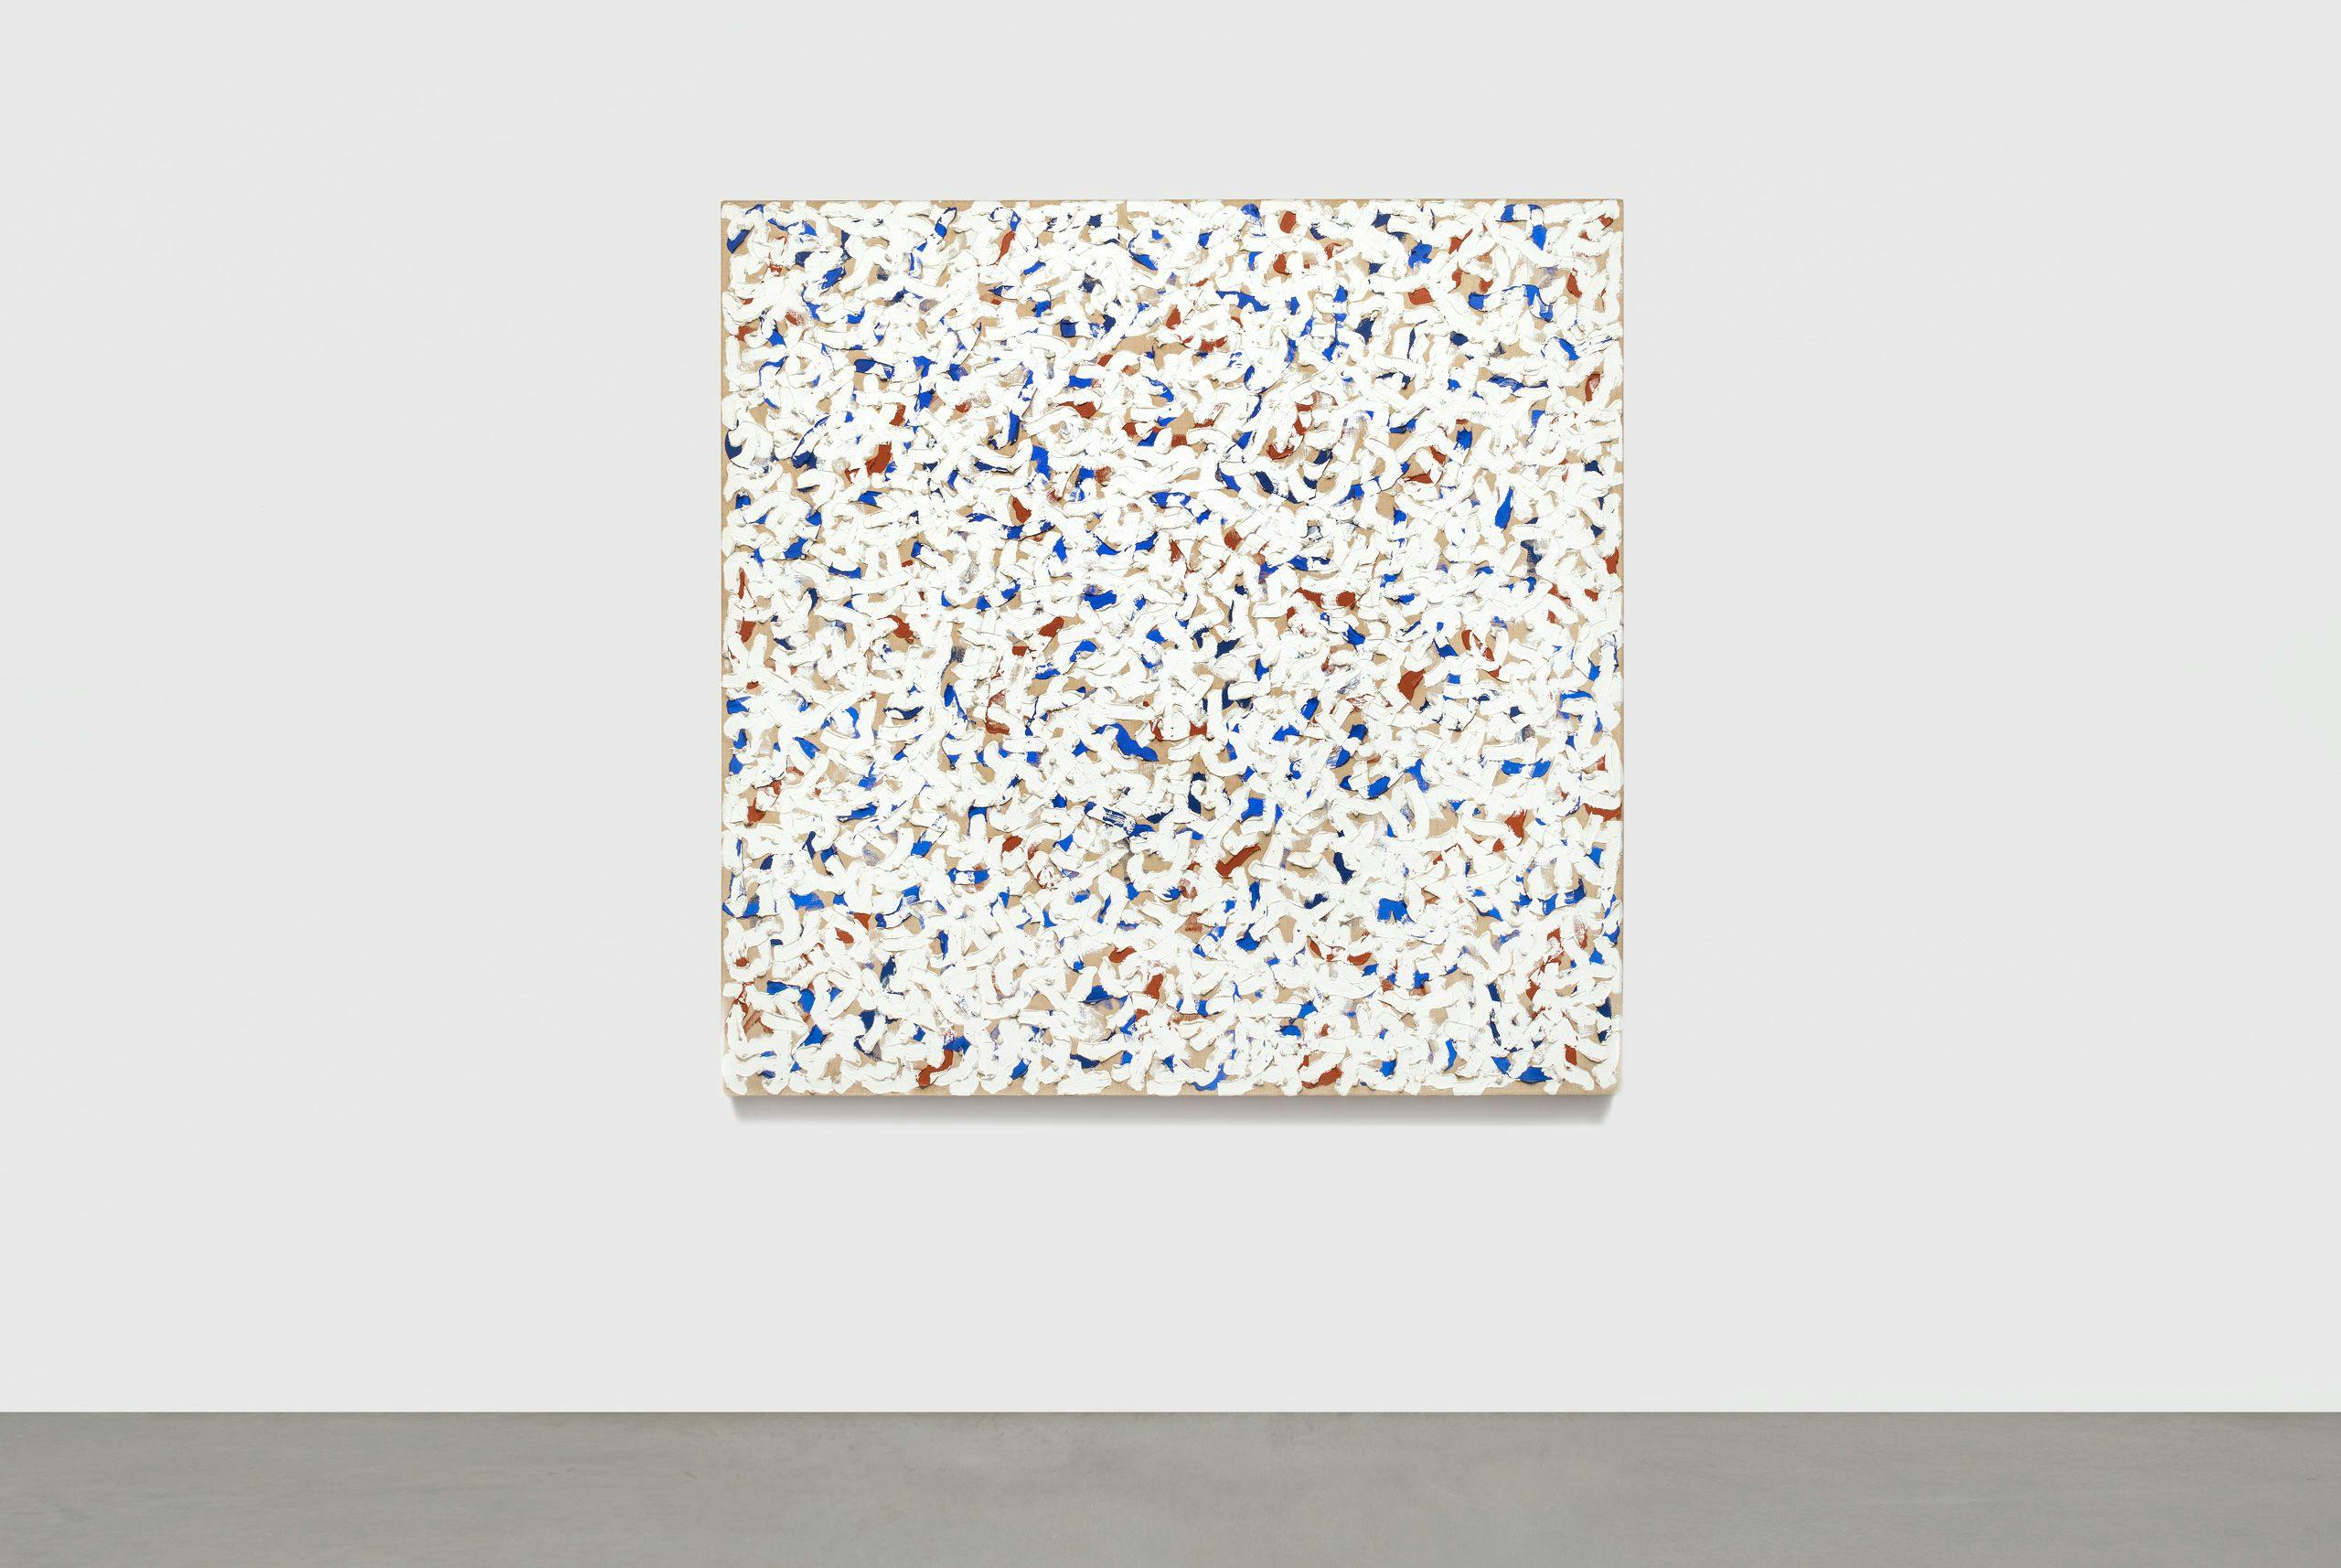 An untitled painting by Robert Ryman dated 1962